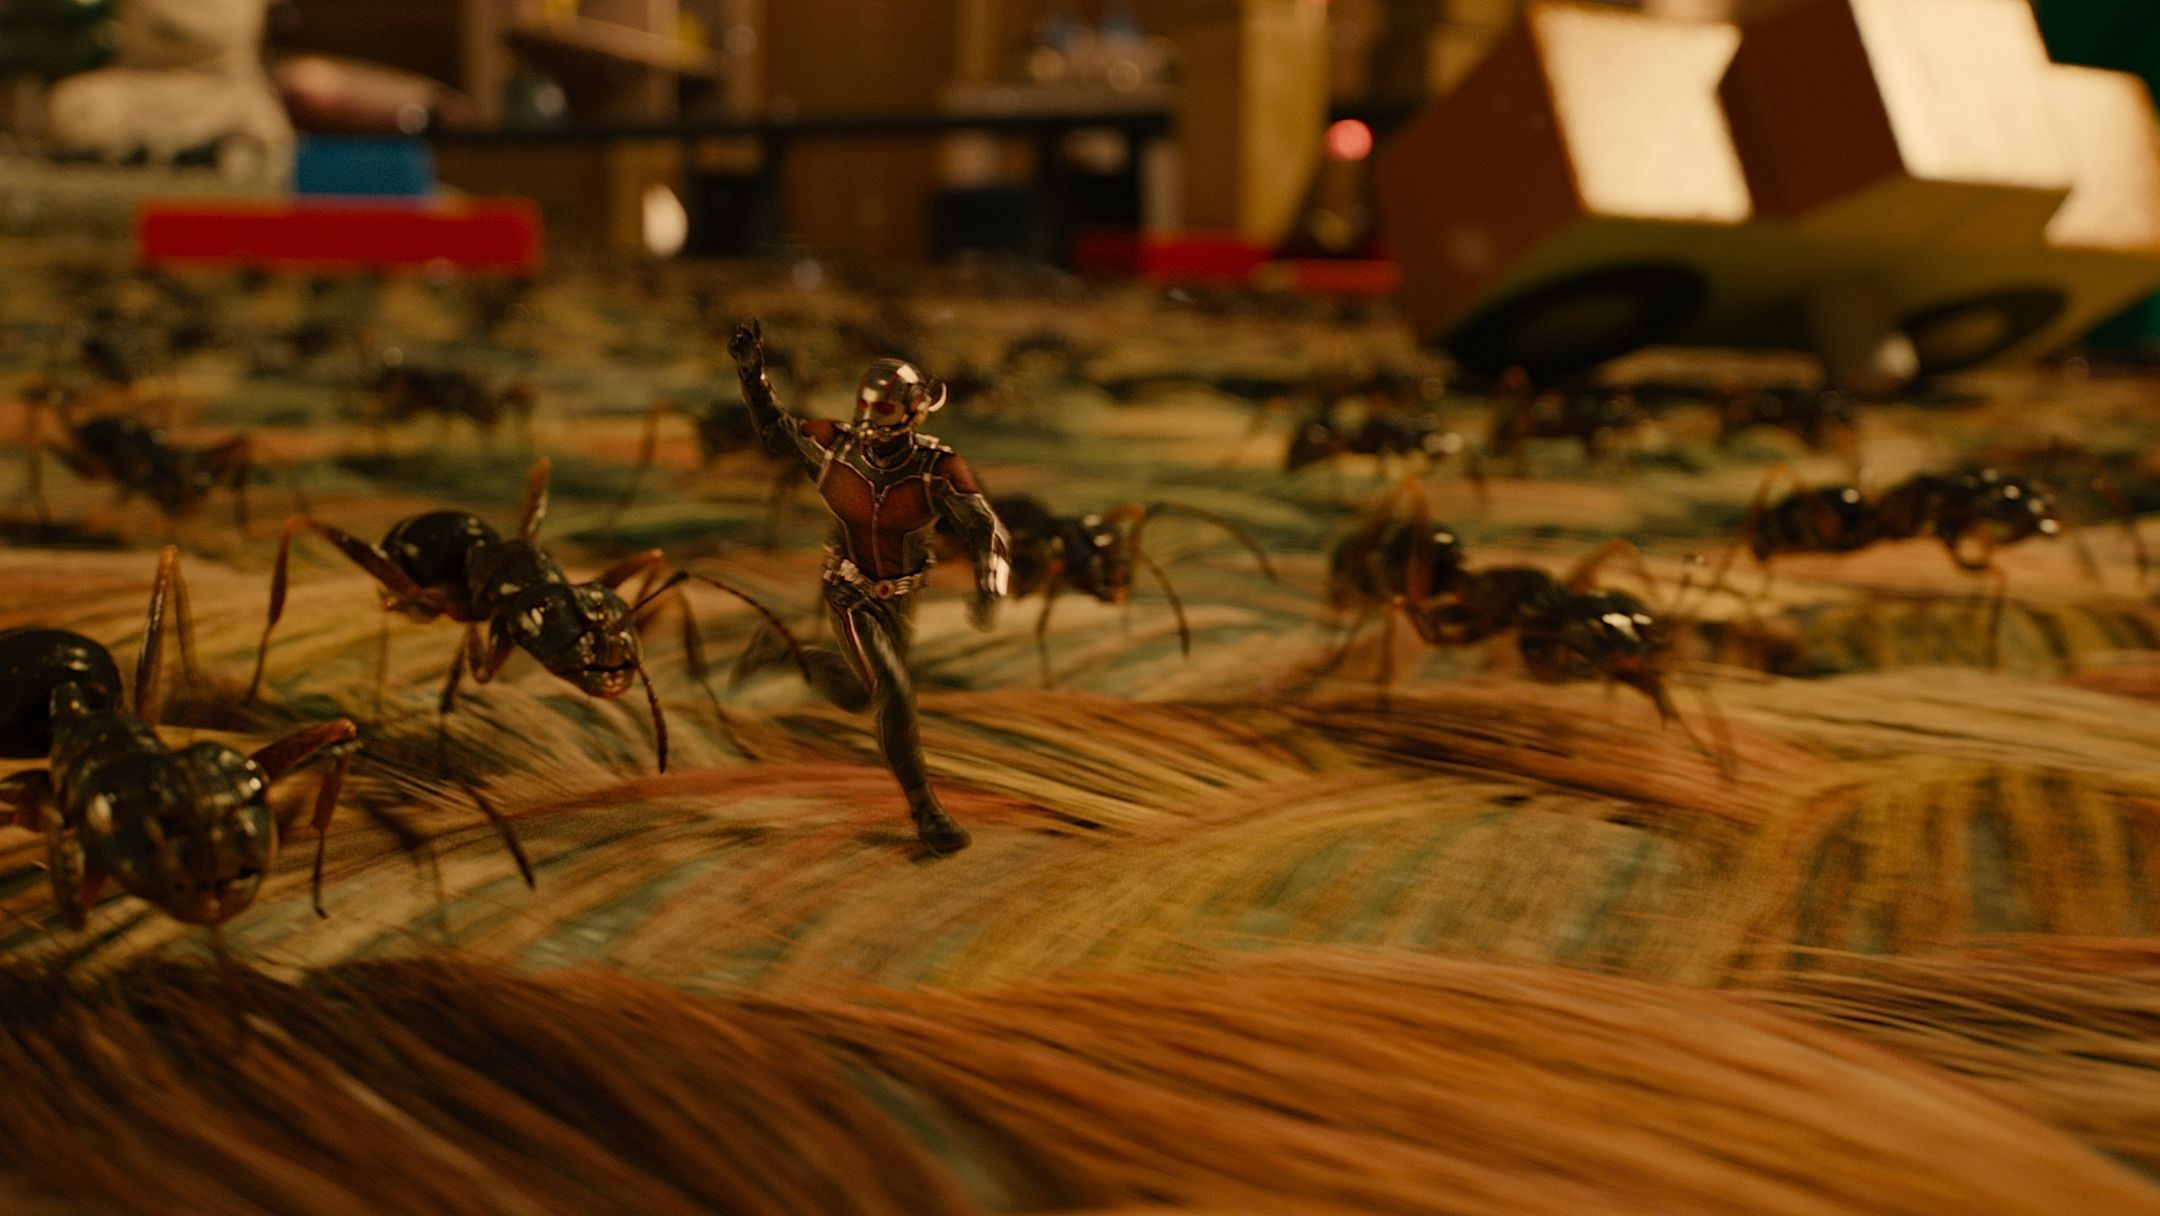 Ant-Man Microverse Photo - Ants on Carpet